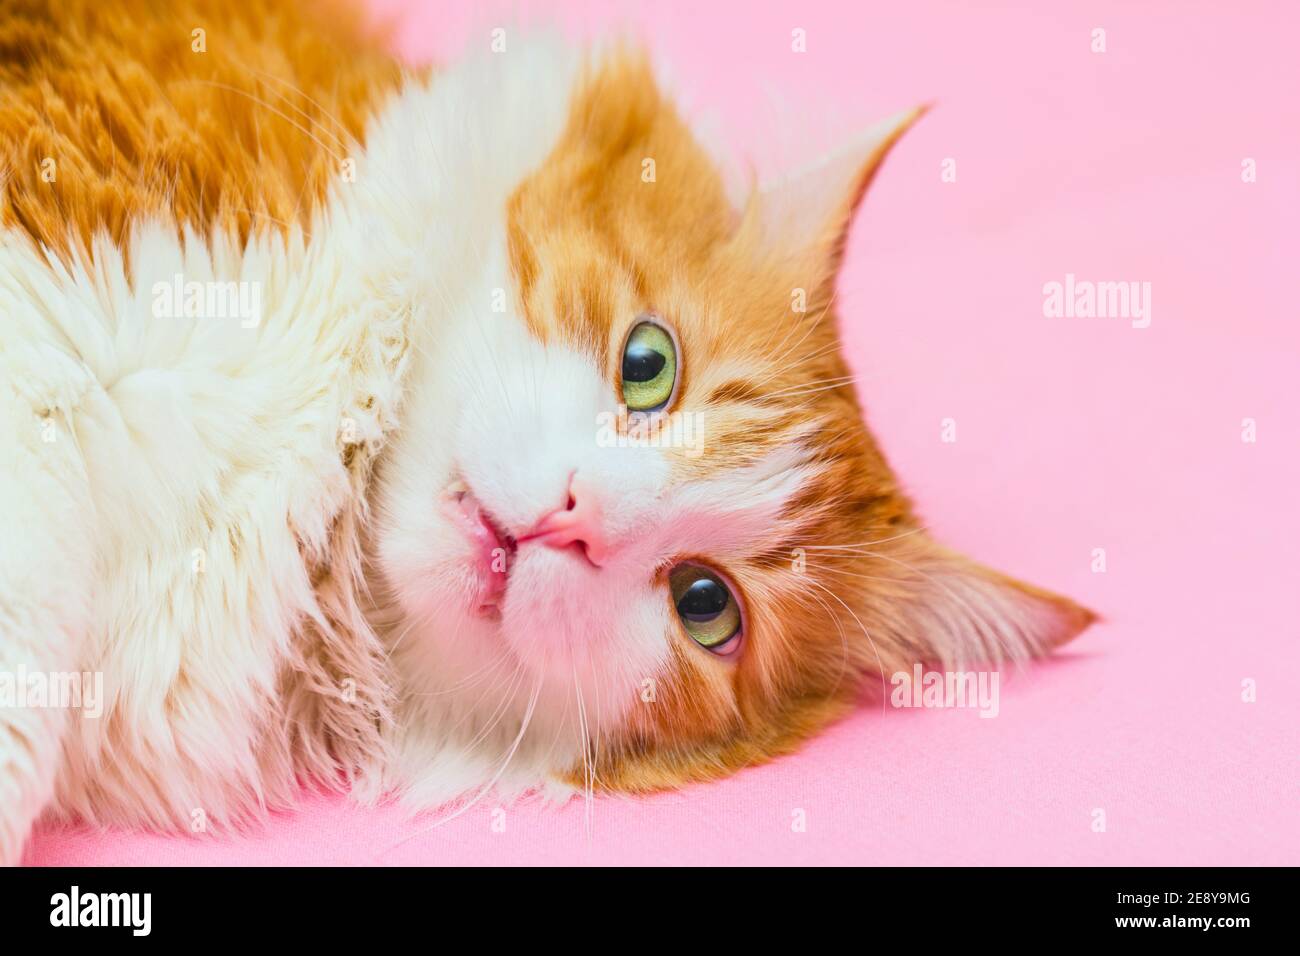 Pretty adult red cat in shock lies on light pink background Stock Photo